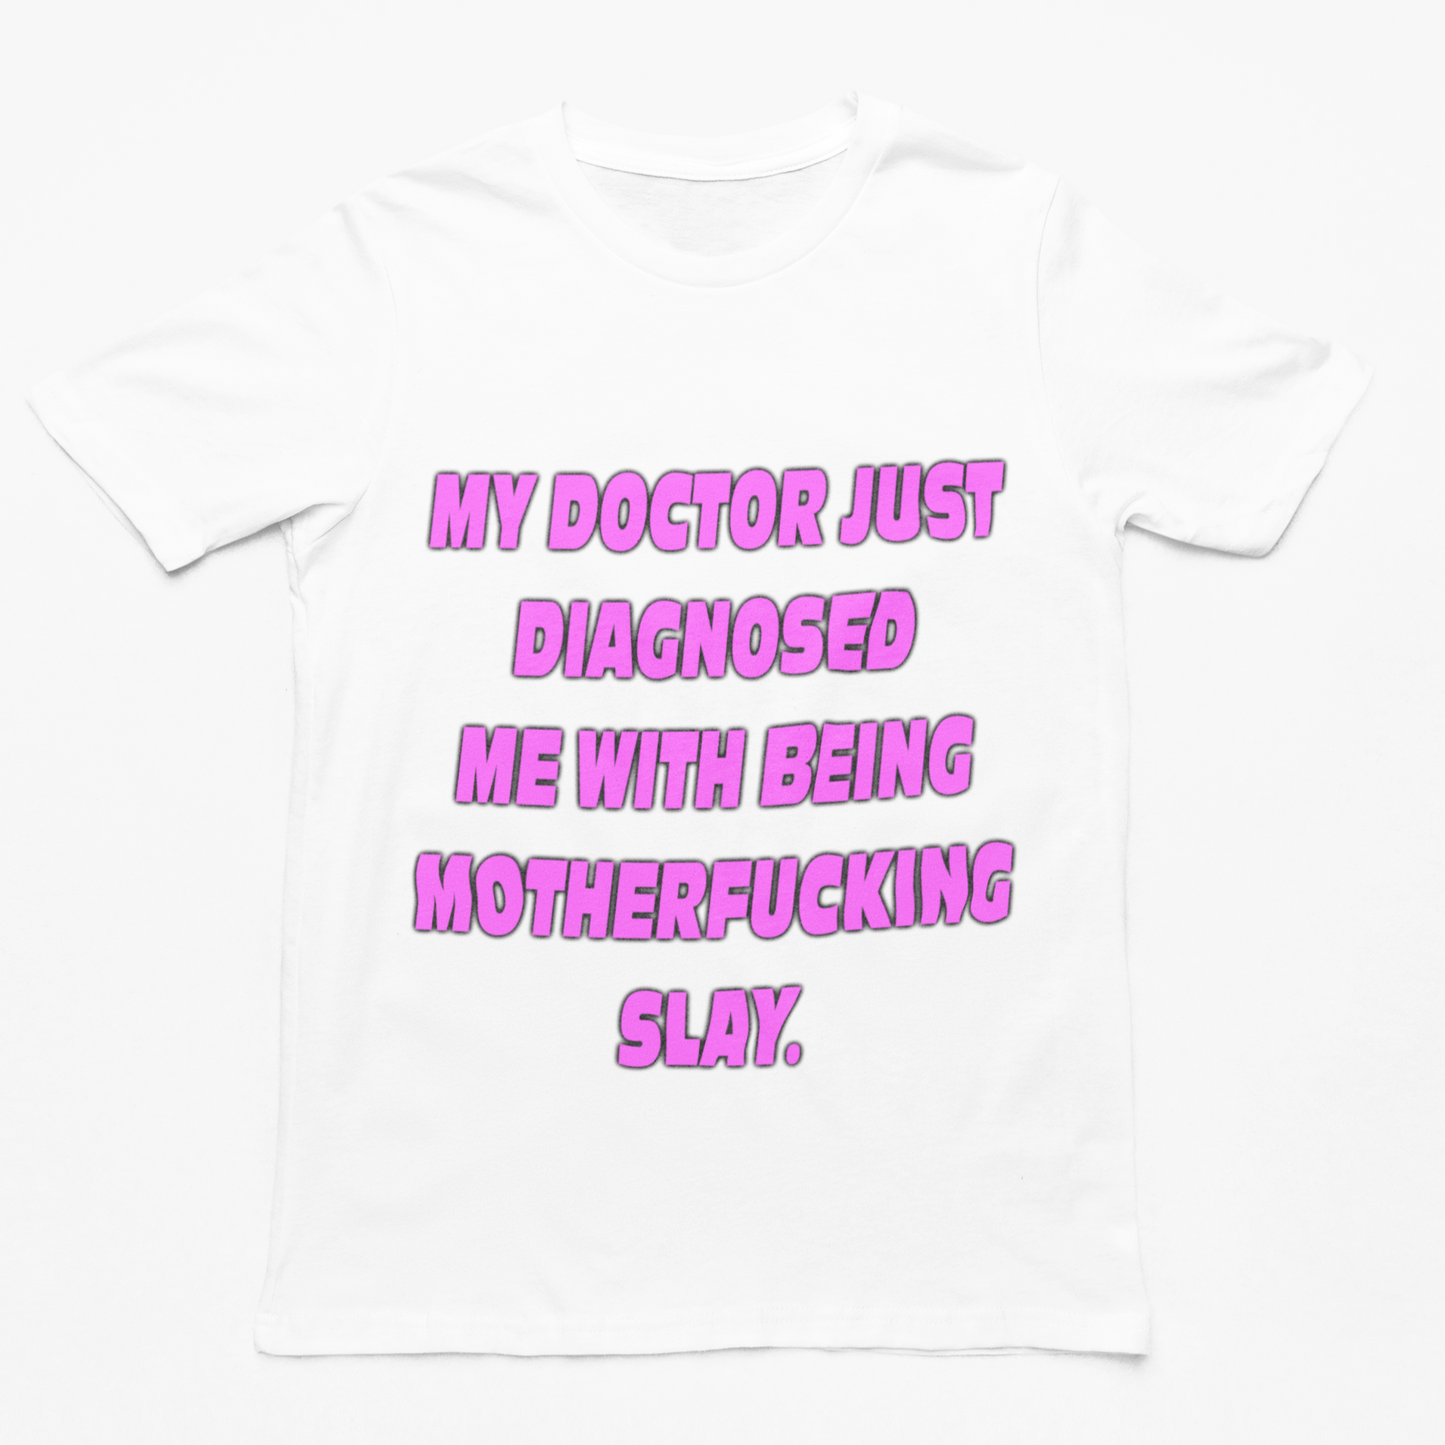 My Doctor Just Diagnosed Me With Being Motherfucking Slay t-shirt